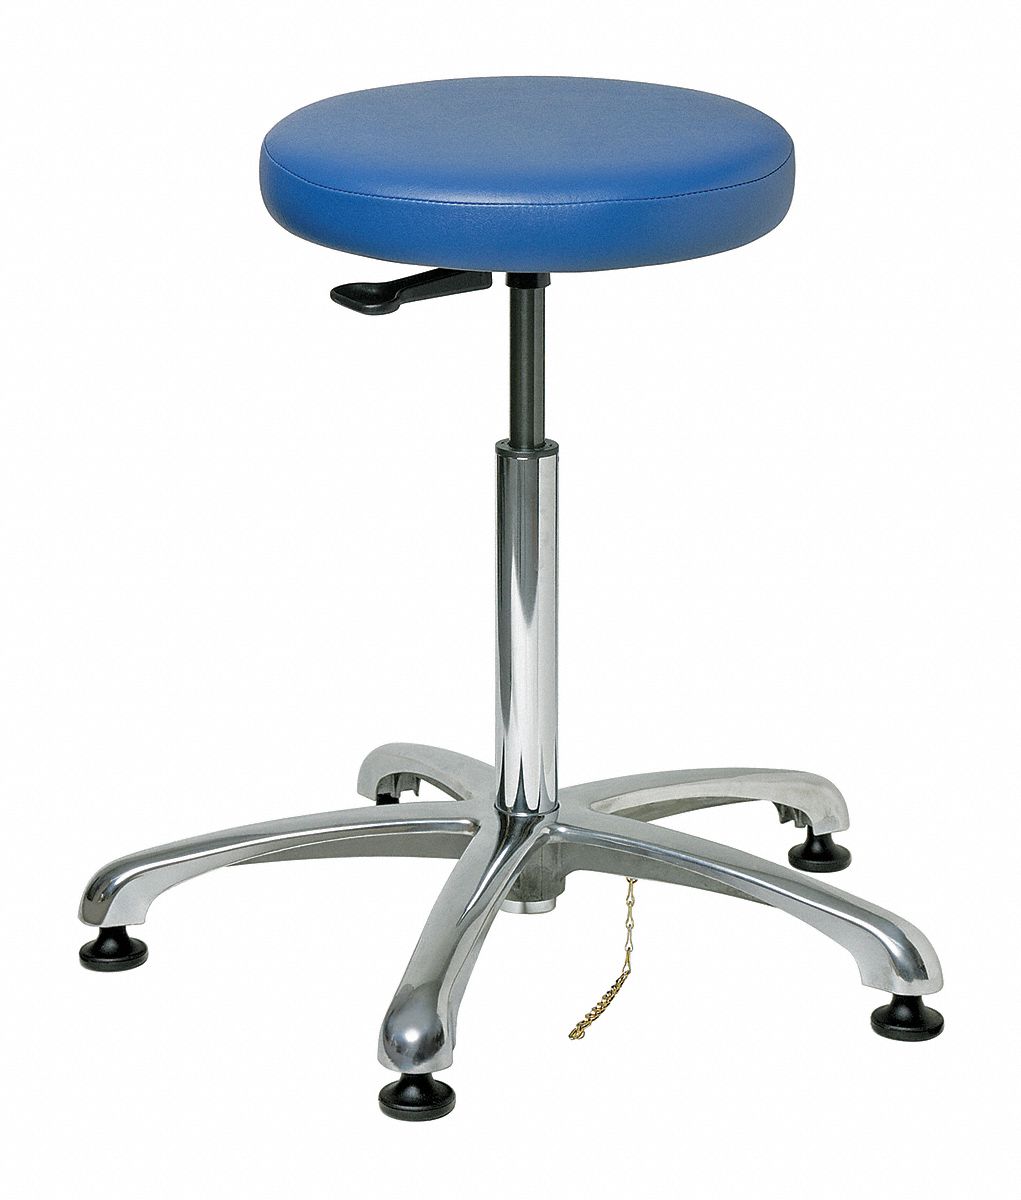 36P861 - ESD Stool Vinyl 21-1/2 to 31-1/2 In Blue